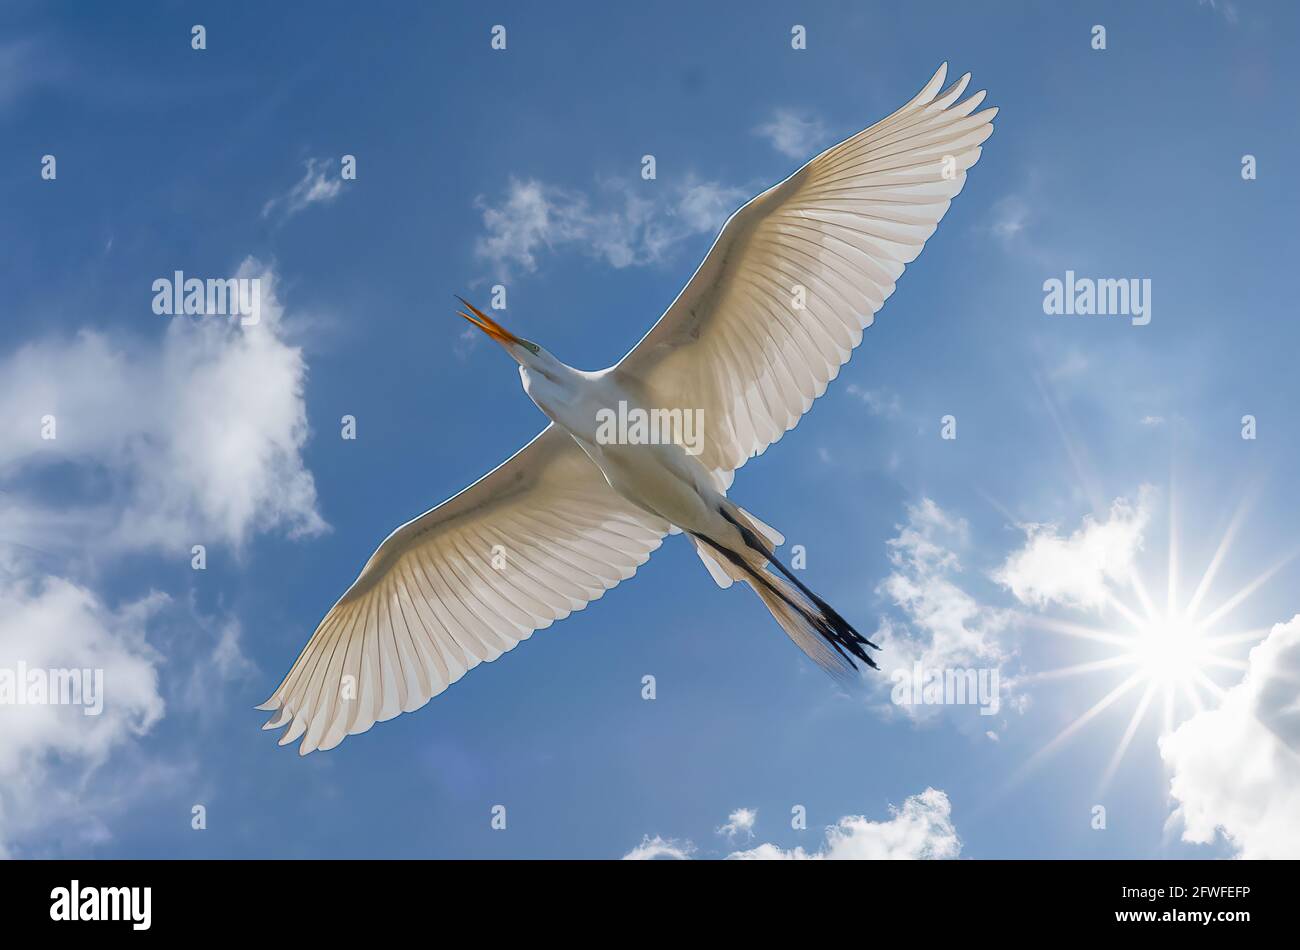 Single white bird soaring in blue sky with white clouds and sunburst in sky above the bird Stock Photo